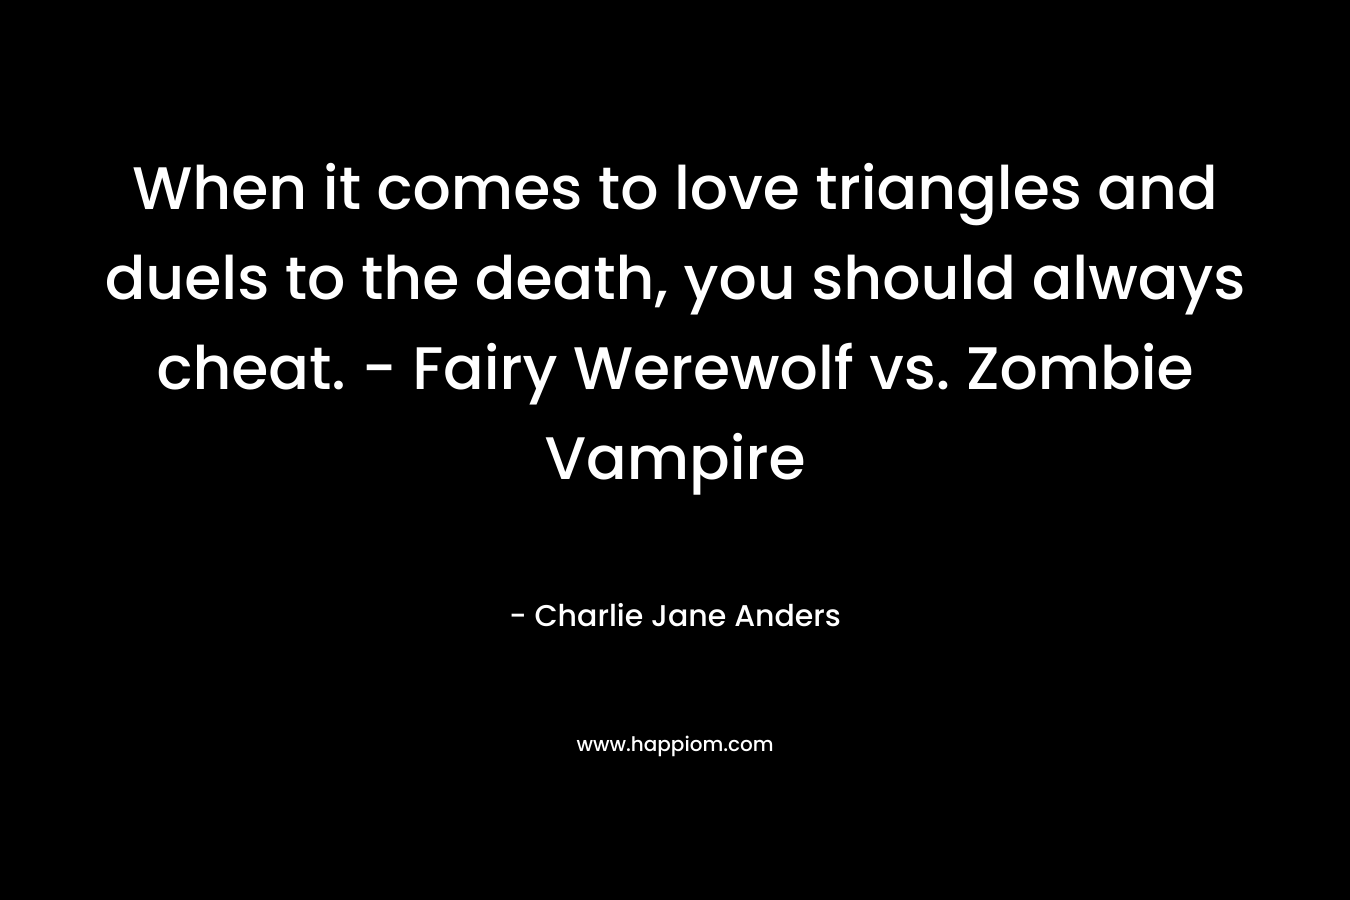 When it comes to love triangles and duels to the death, you should always cheat. - Fairy Werewolf vs. Zombie Vampire